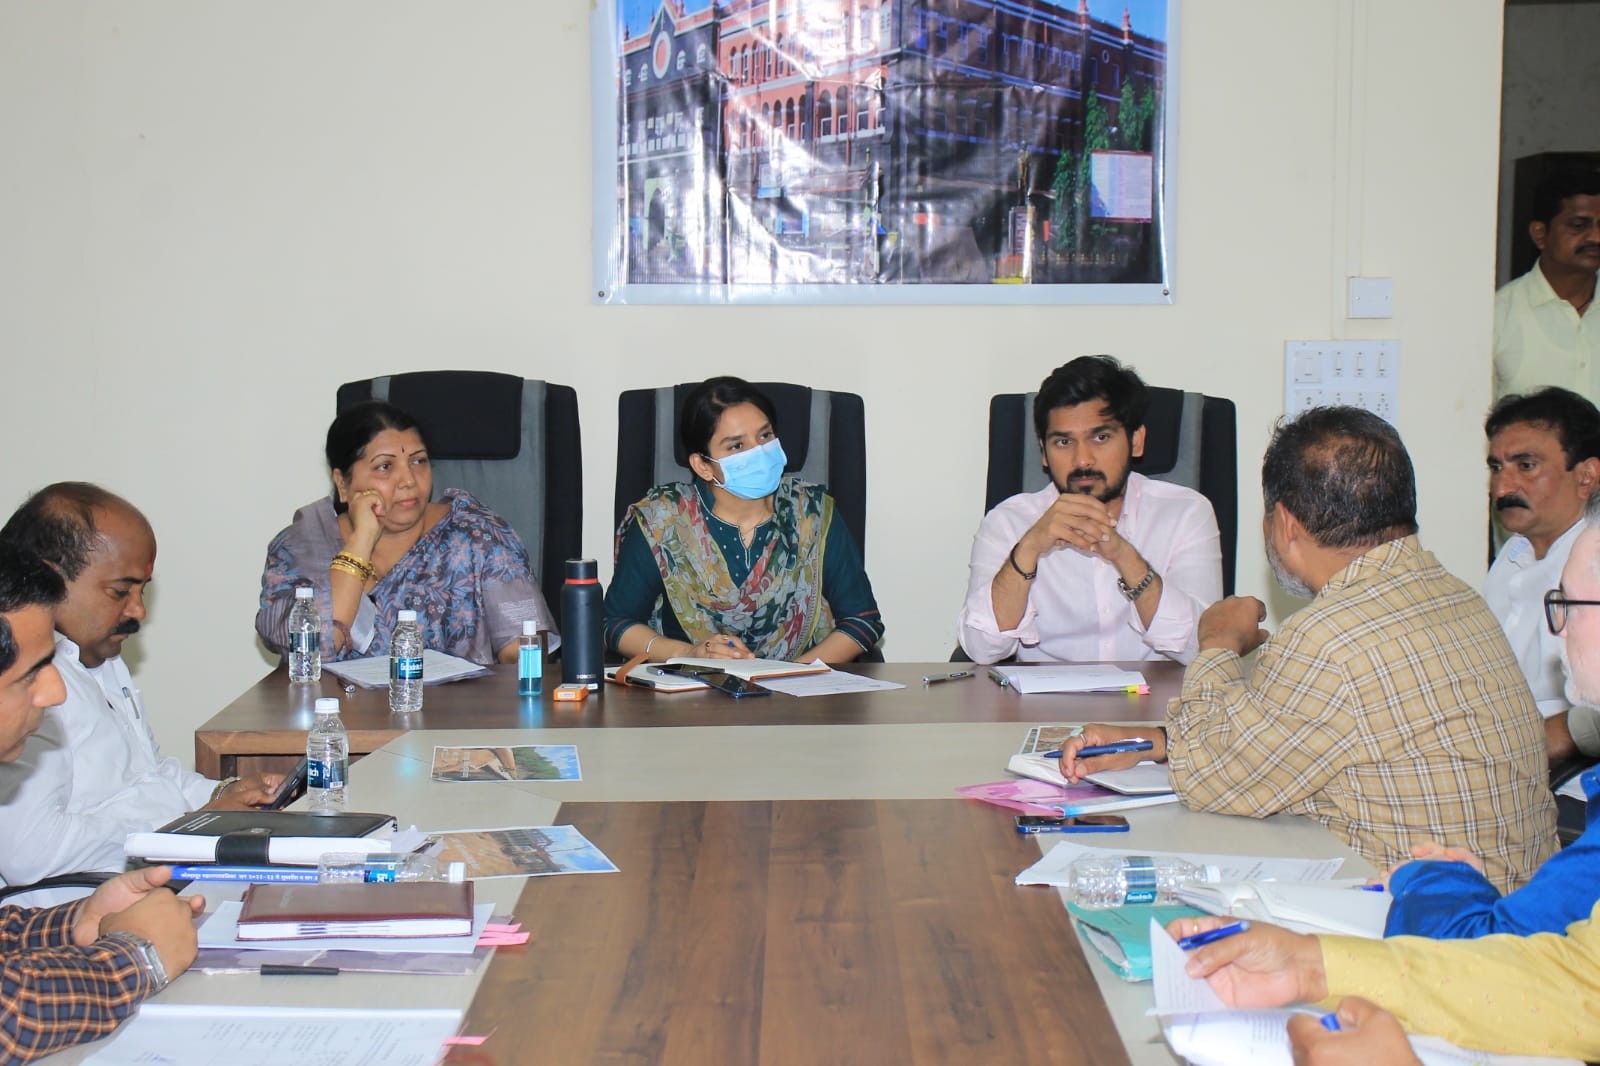 Meeting of both the MLAs with the municipal administration regarding various issues in the city